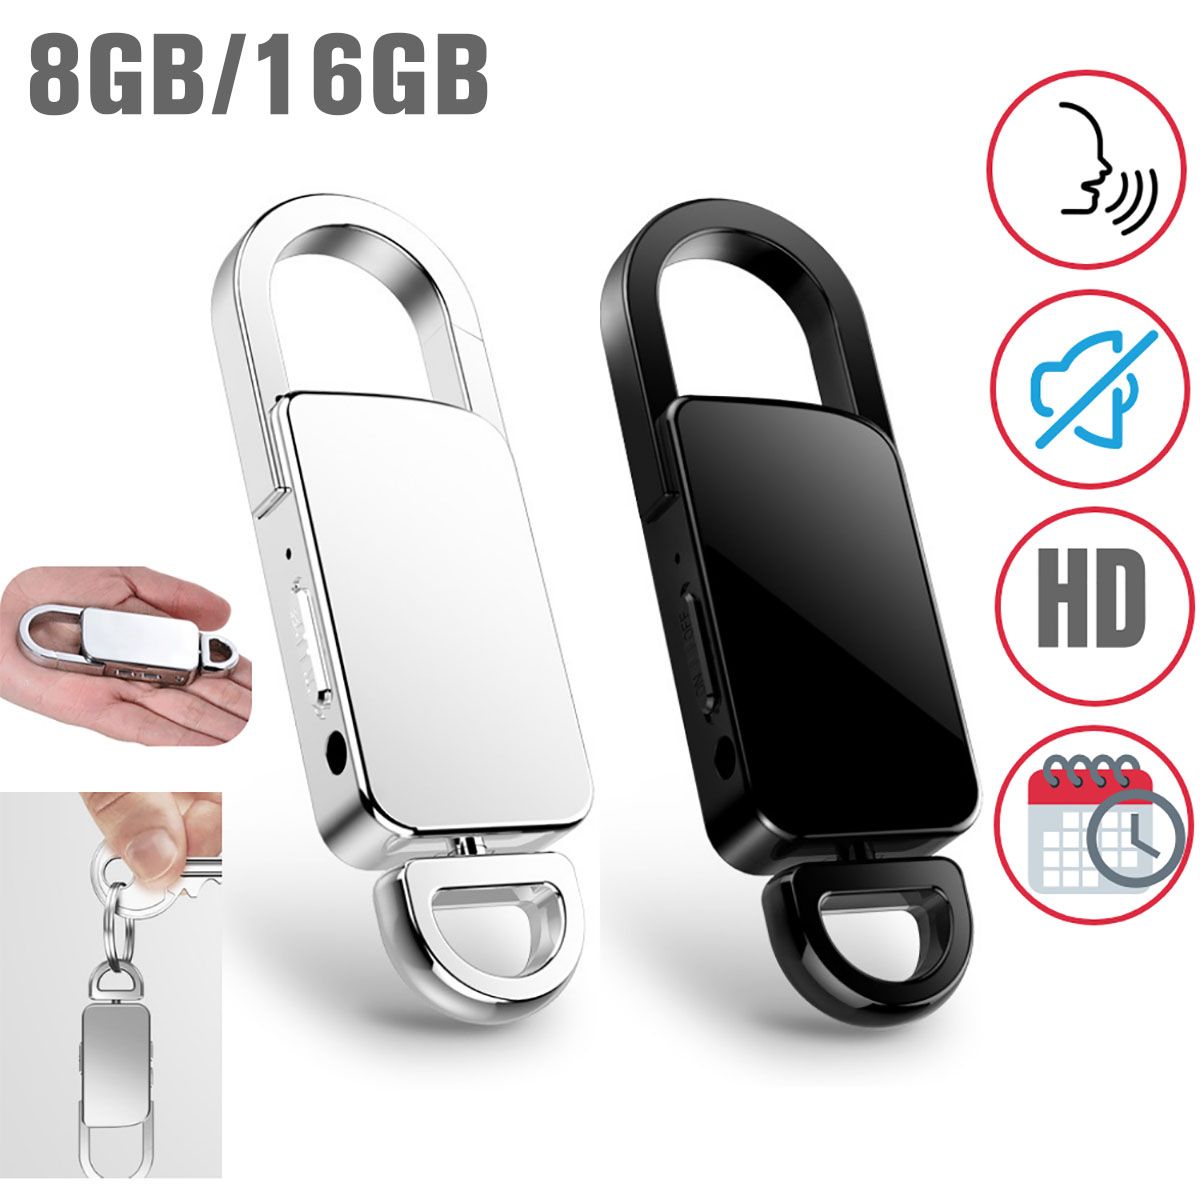 8GB-16GB-Audio-Recorder-Voice-Activated-Device-90-Hours-Recording-Keychain-1567240